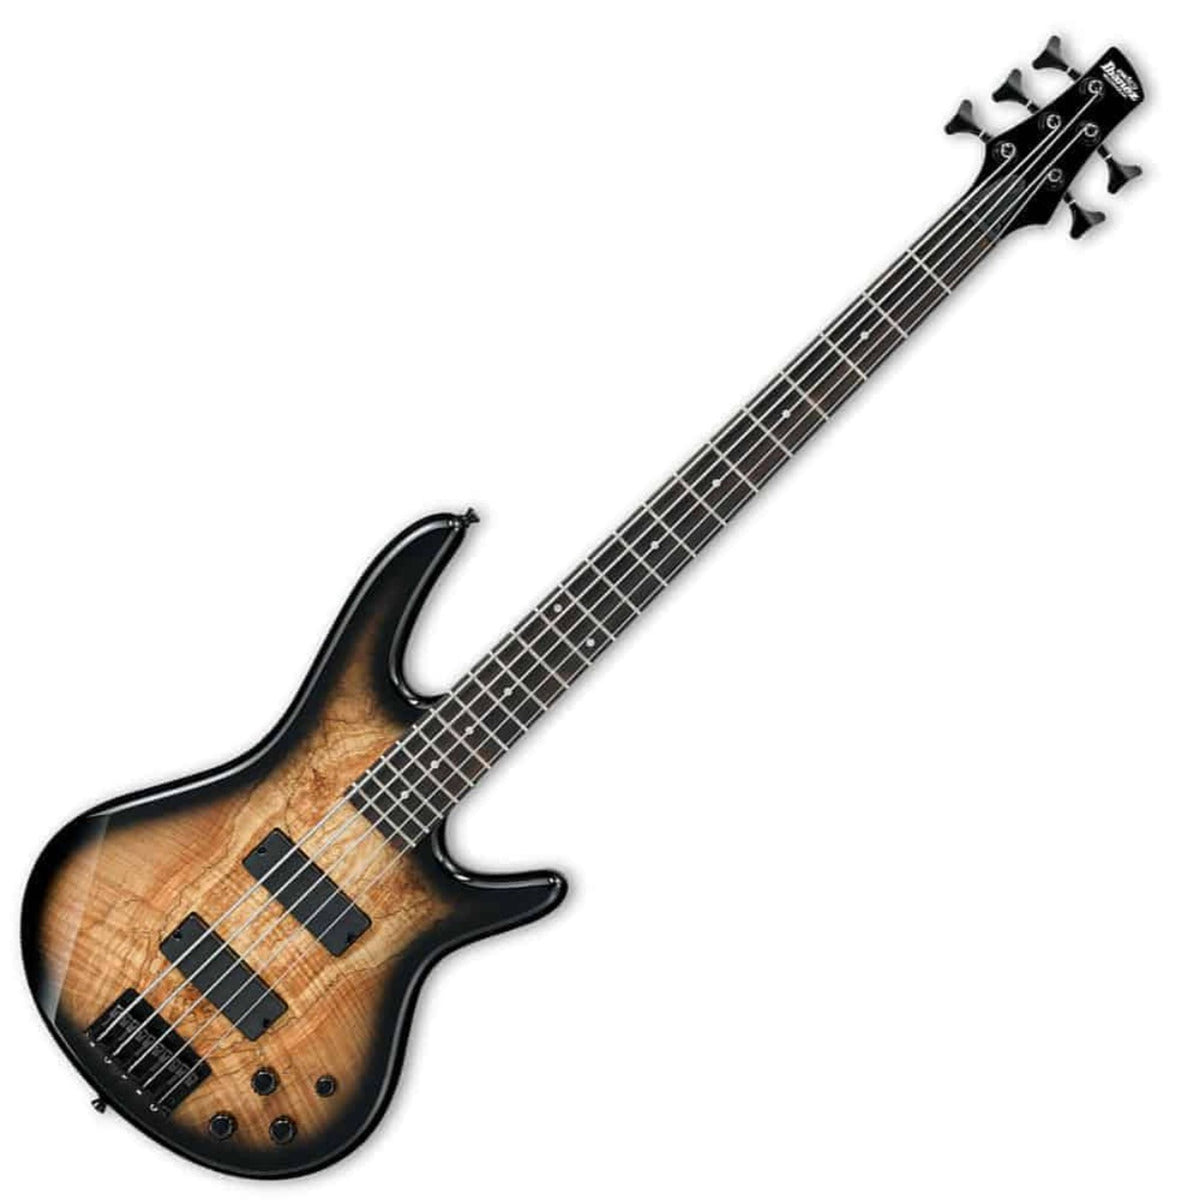 The Ibanez Gio SR205SM is a fantastic option for the bass player that’s looking to dip their toes into the world of 5-strings without breaking the bank.